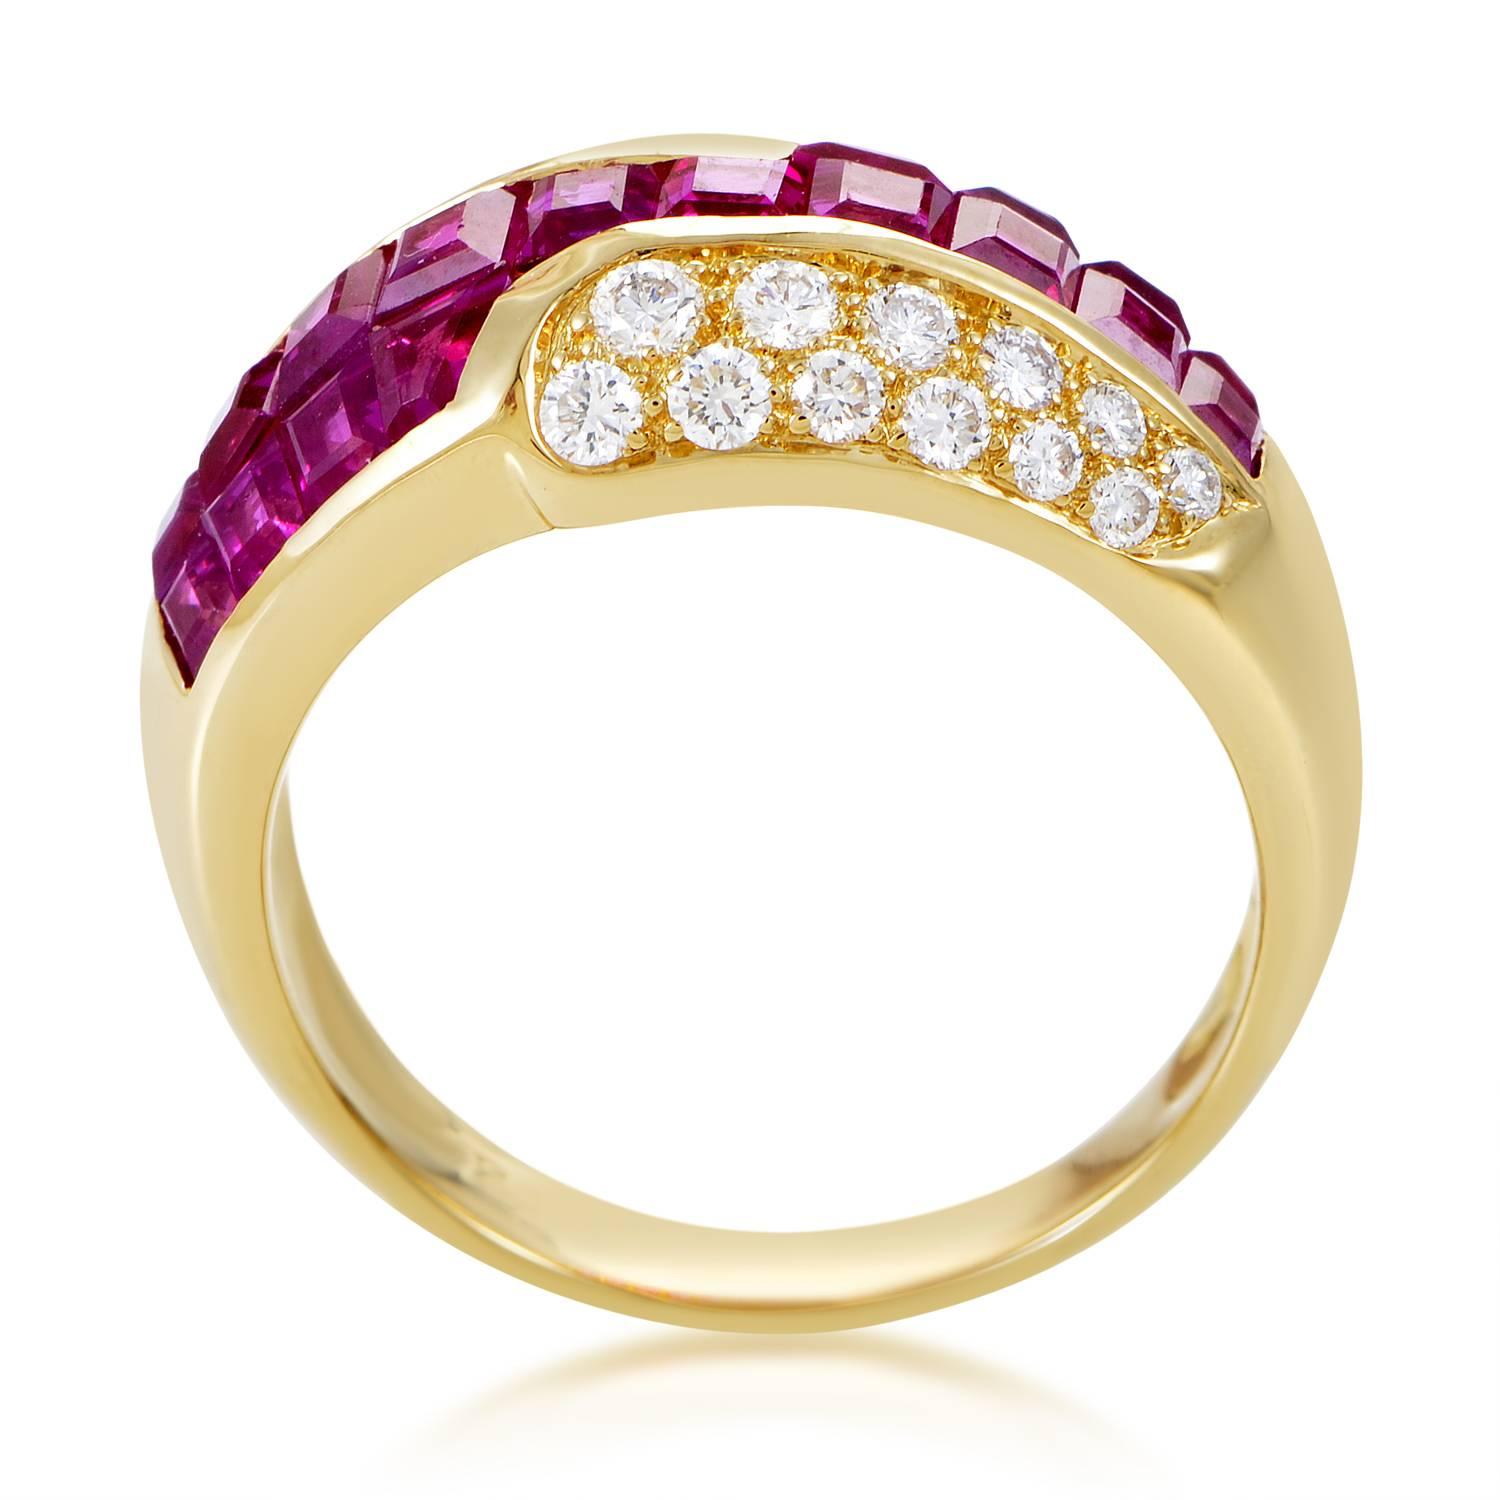 The Mouawad name is synonymous with luxury and opulence, and this ring is a testament to the brand's reputation. Forged from the finest 18K yellow gold, and accented with 2.13ct of invisible-set rubies and .44ct of round diamonds, this ring is